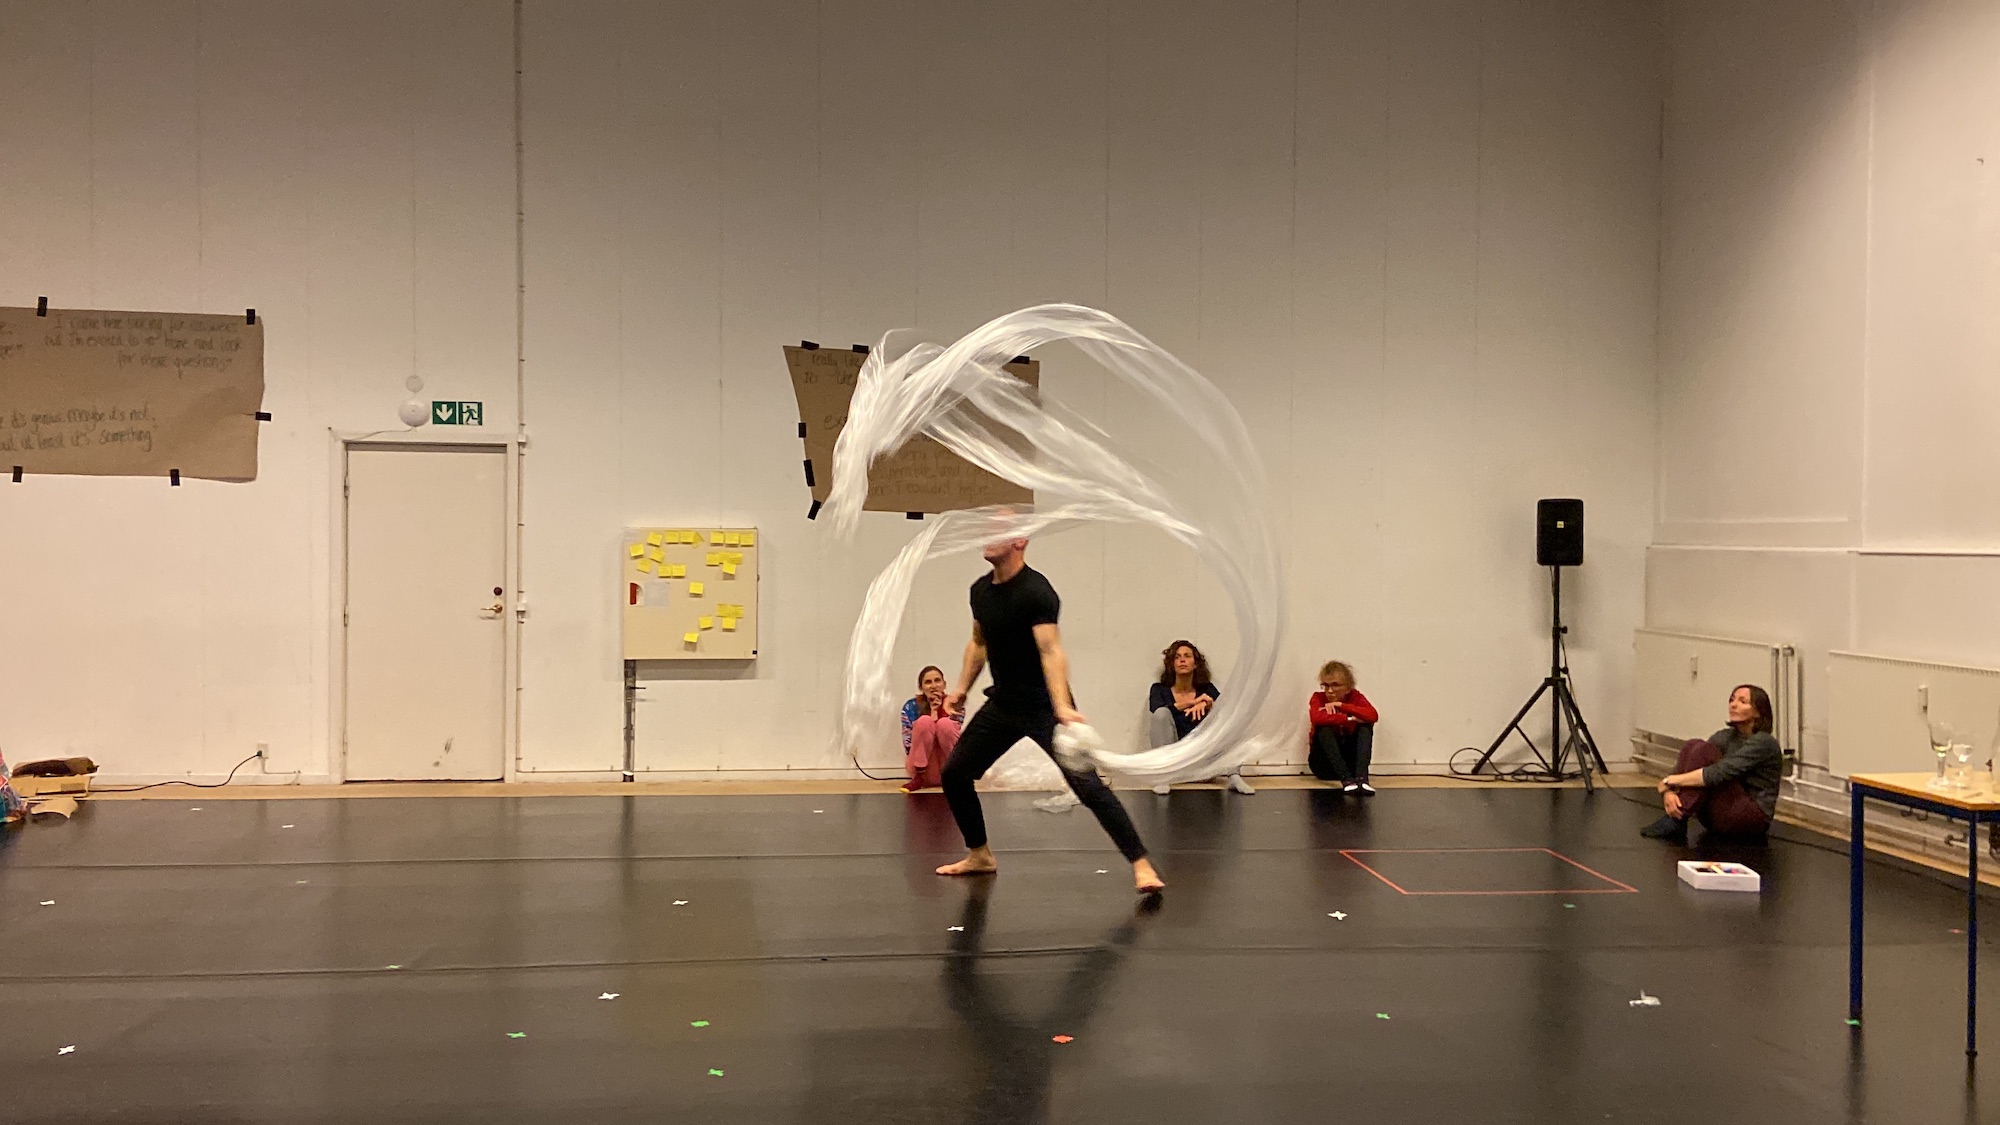 A participant wearing black moves with a long piece of white material, whirling it poetically around their body.